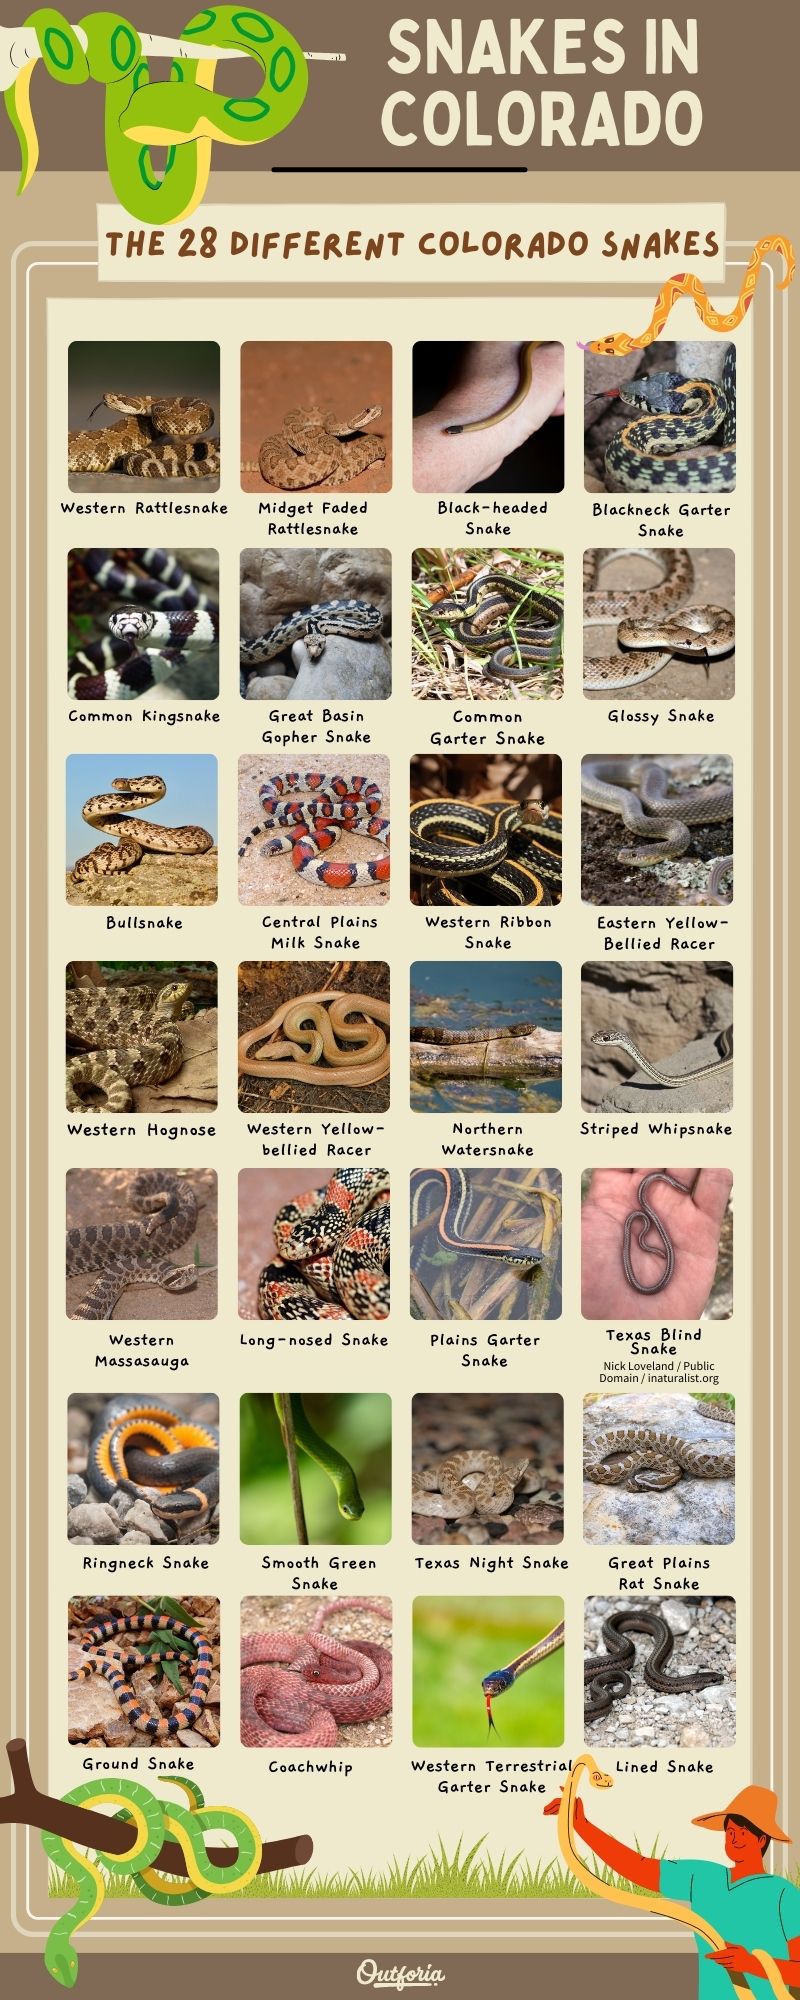 chart of images and names of the 28 species of snakes in Colorado